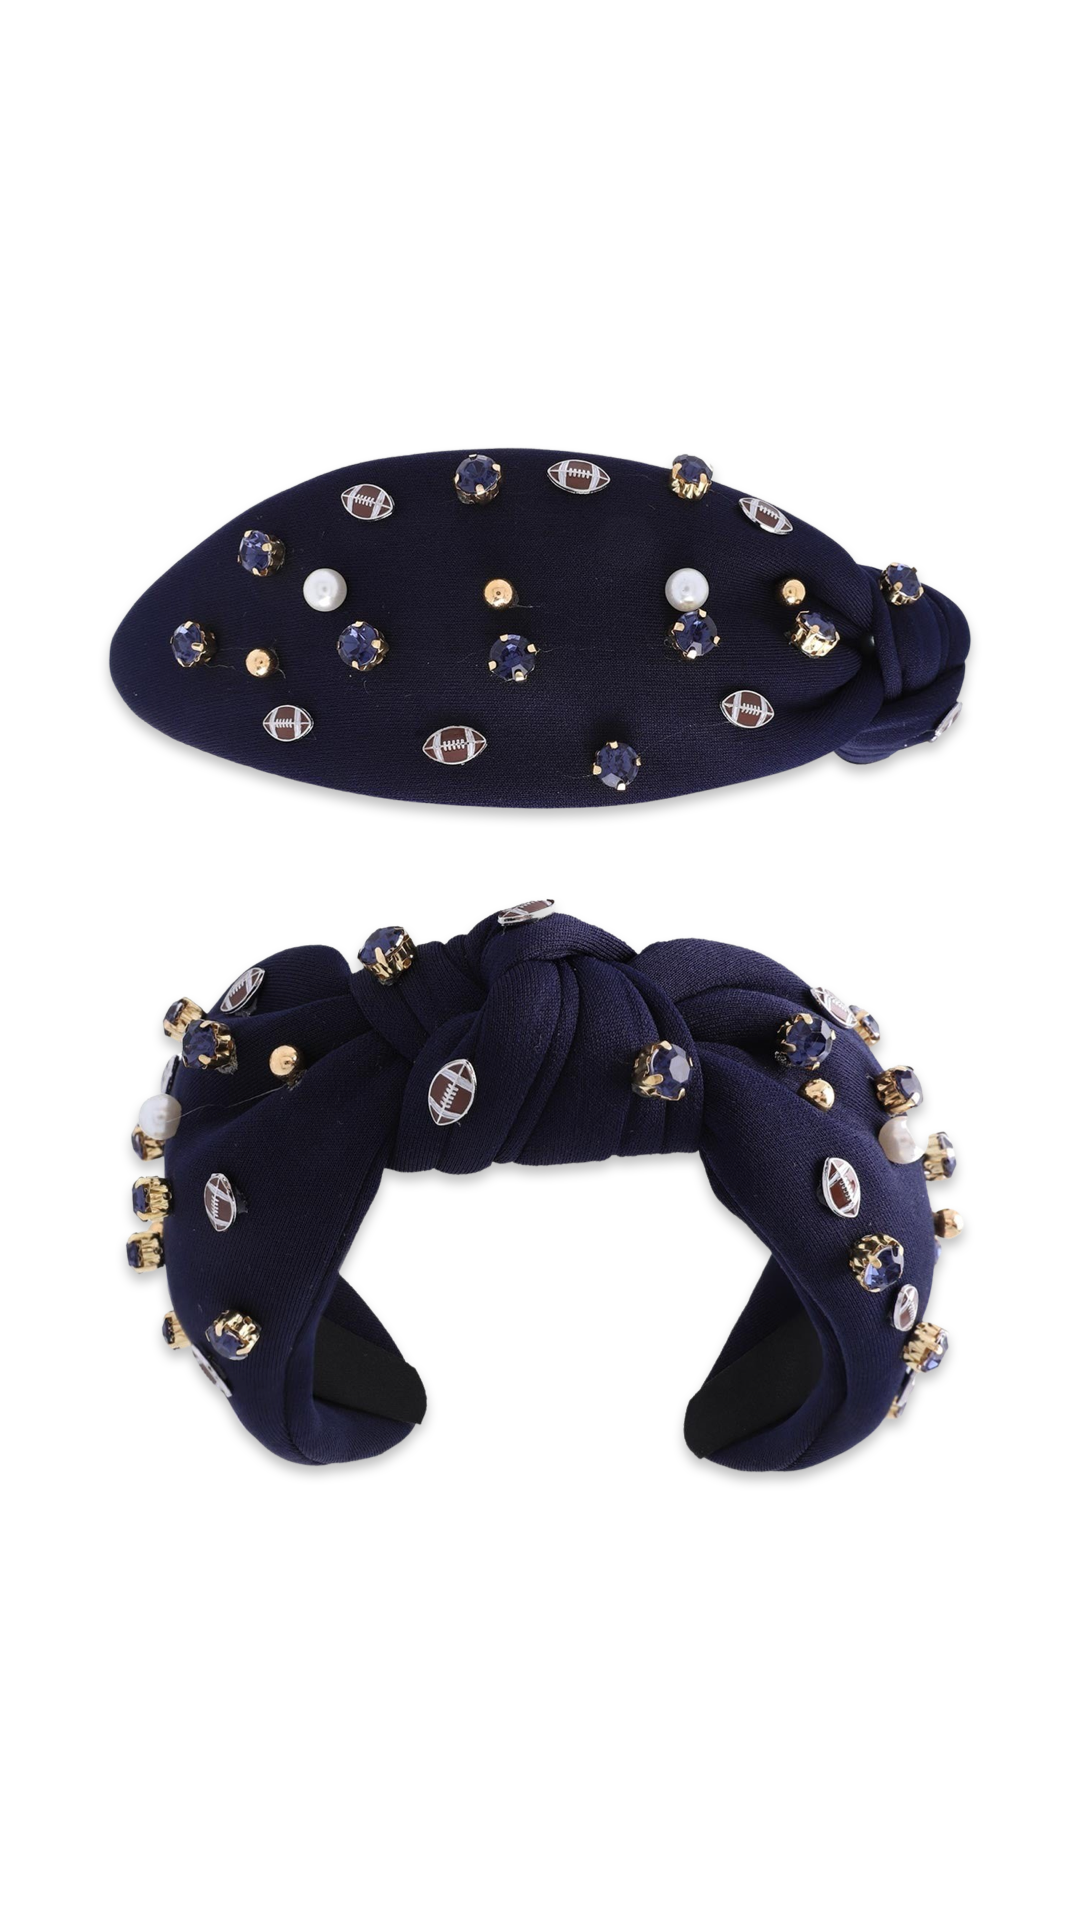 Navy Game Day Football Knotted Headband